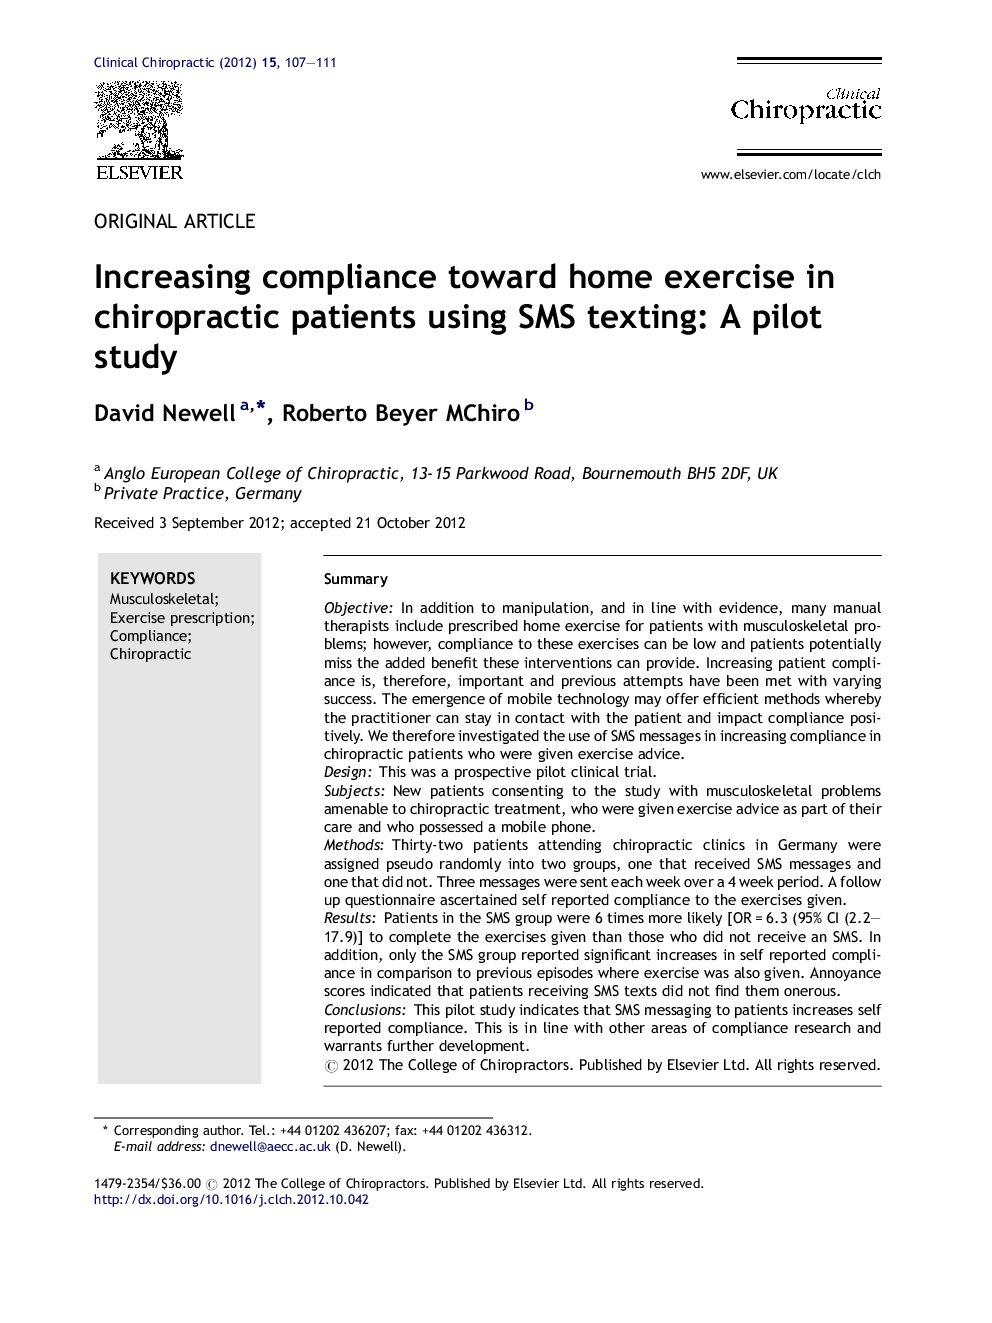 Increasing compliance toward home exercise in chiropractic patients using SMS texting: A pilot study